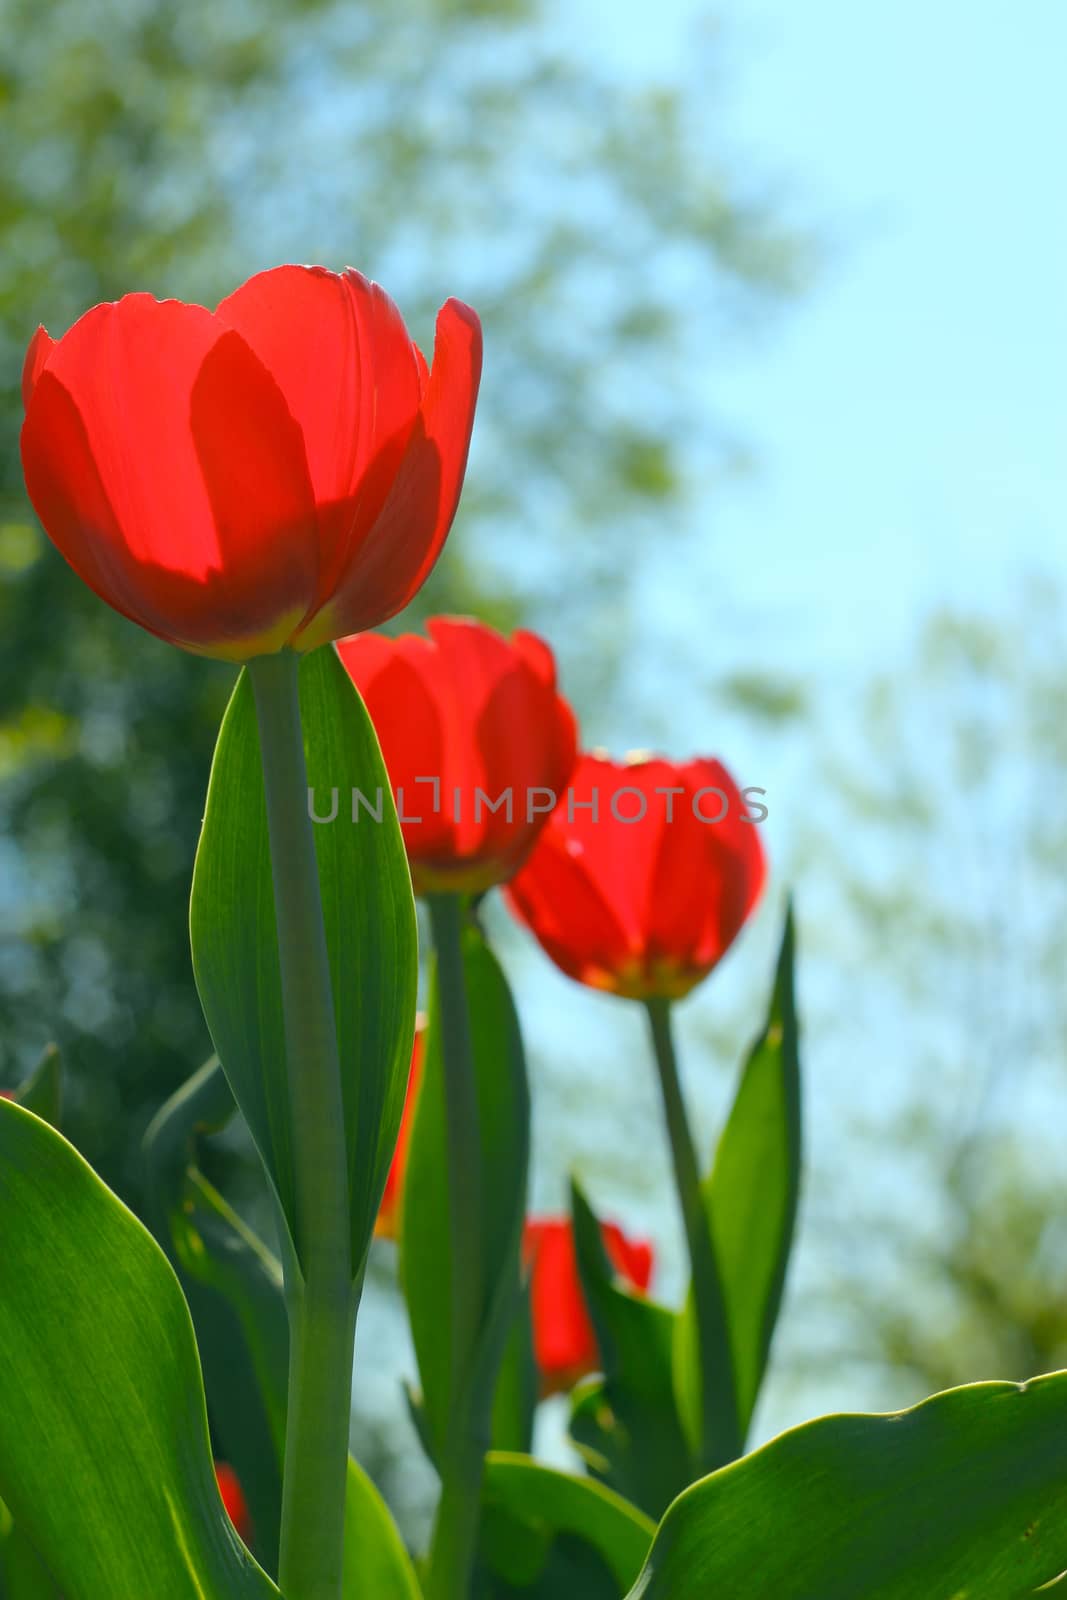 Red tulips in the garden close up view